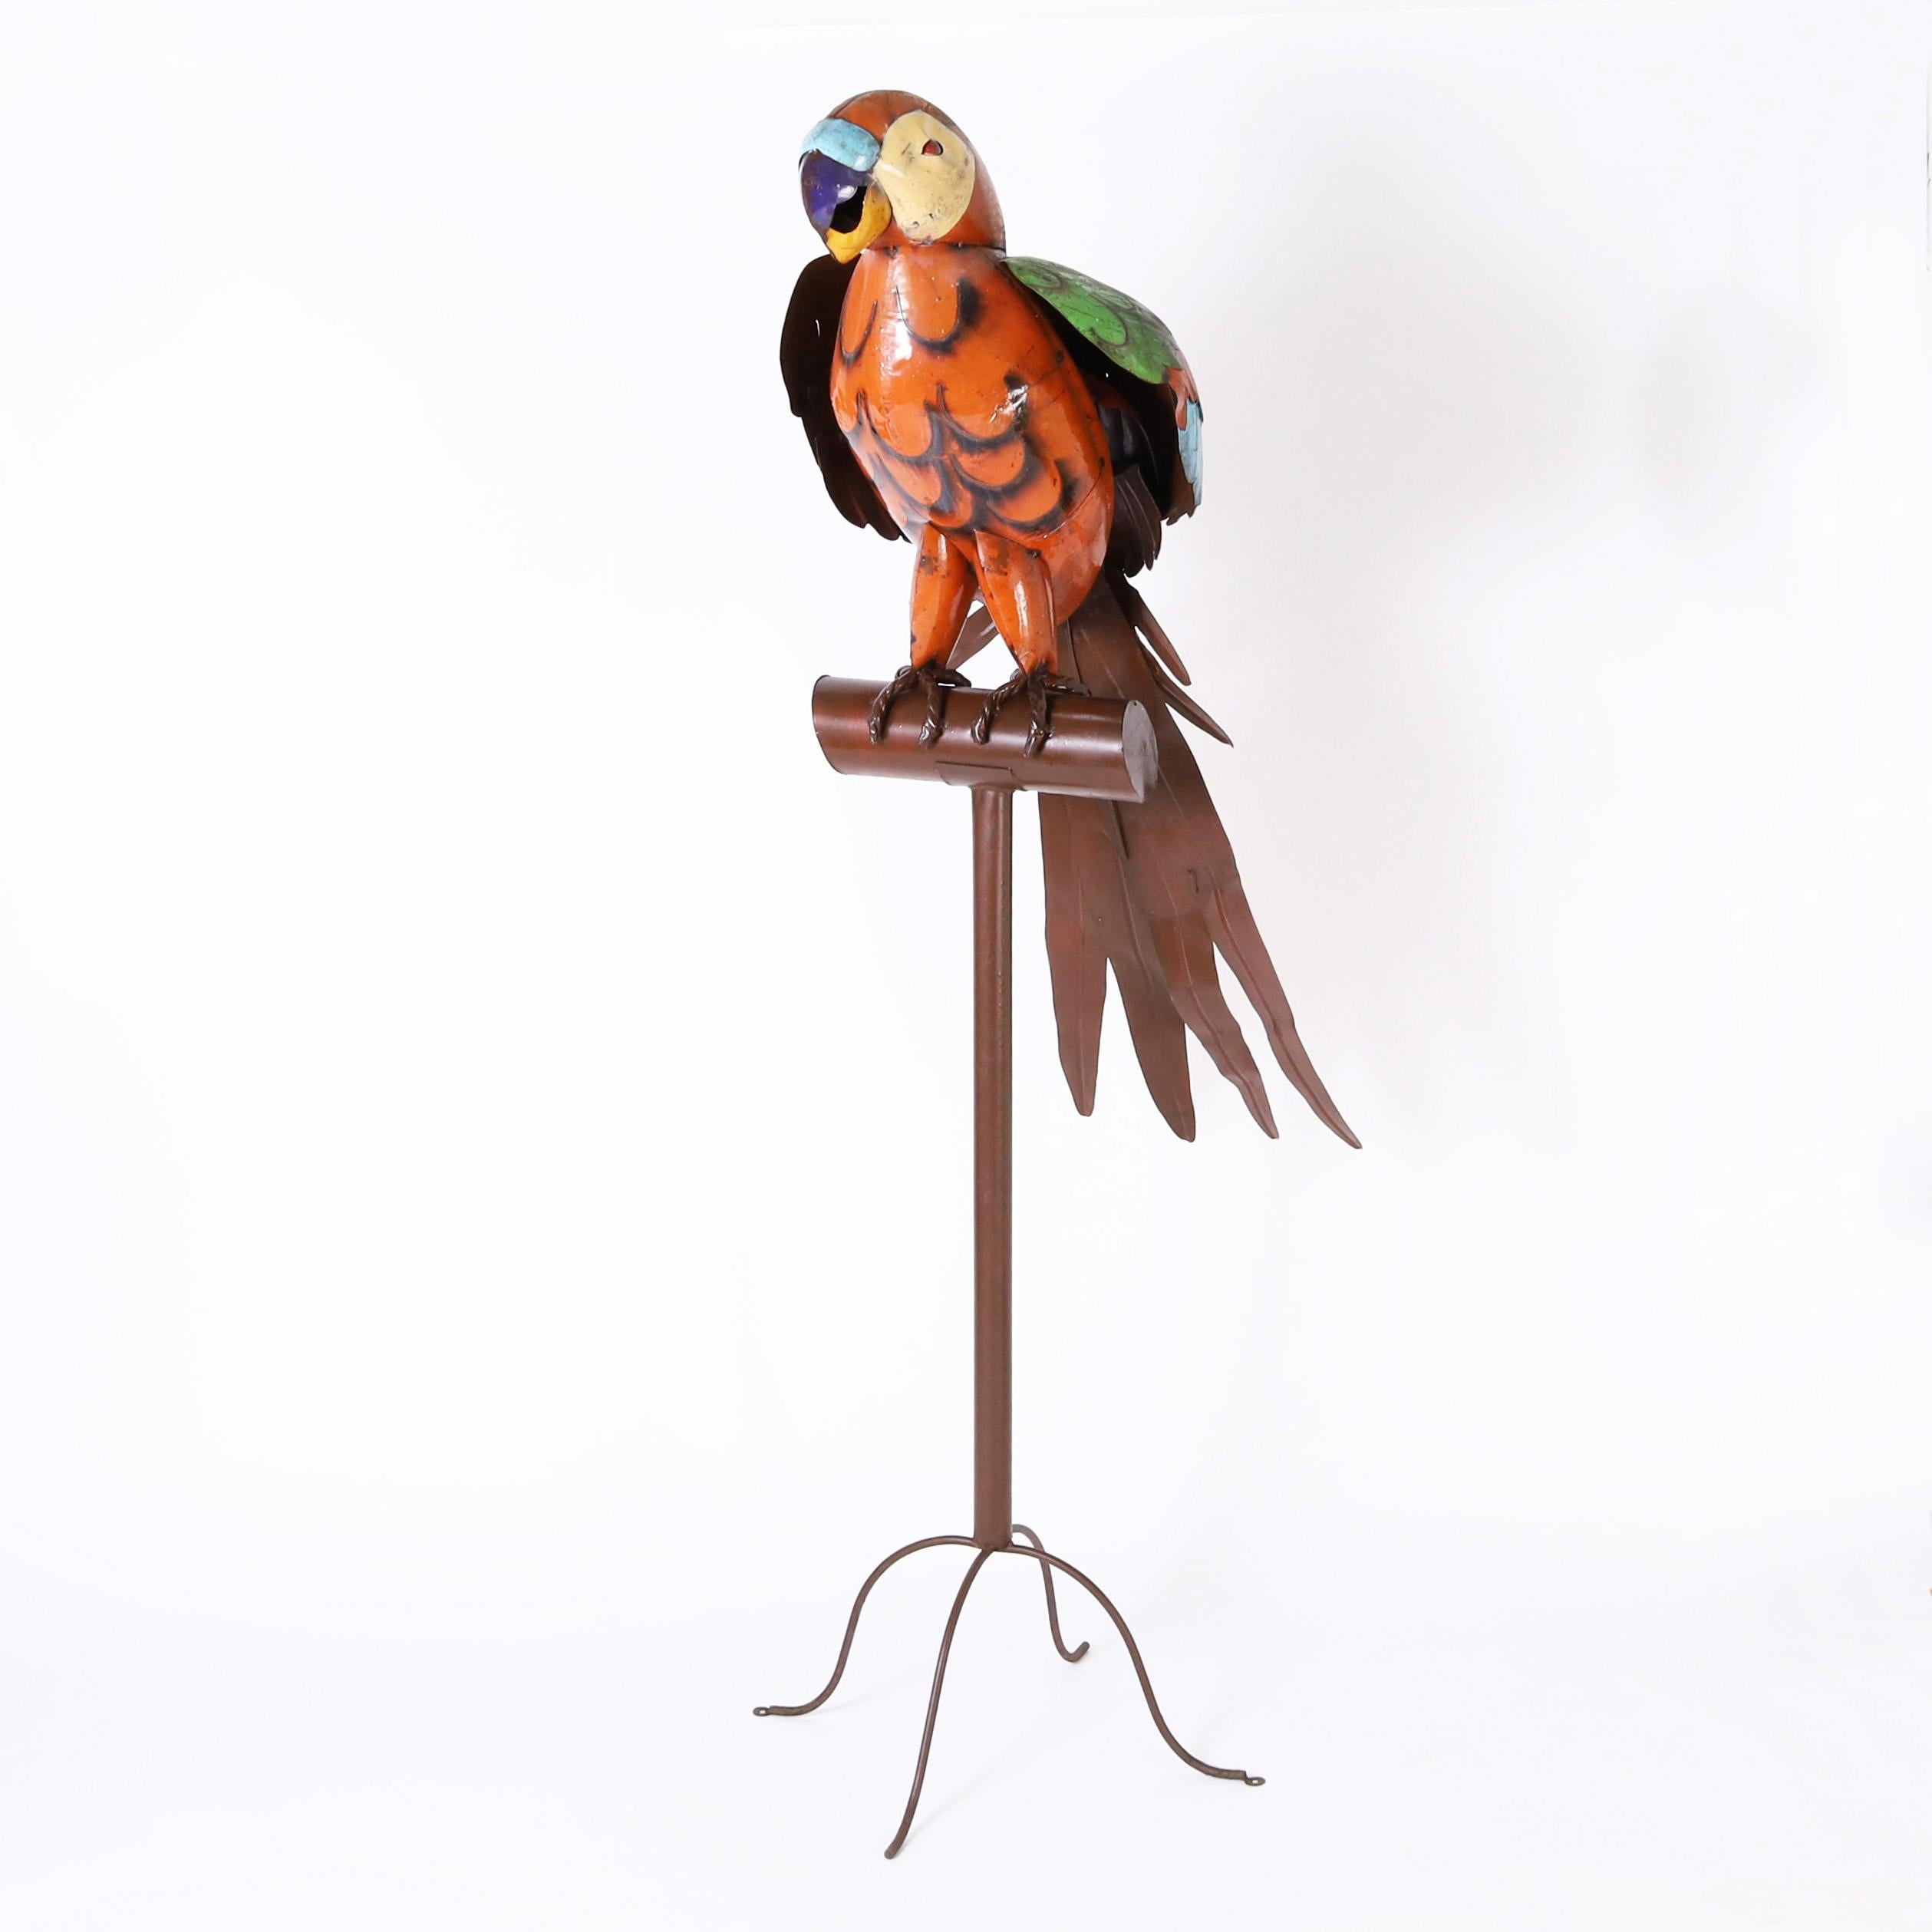 Outrageous vintage giant parrot sculpture hand crafted in metal, paint decorated and permanently perched on a metal stand with four cabriole legs.